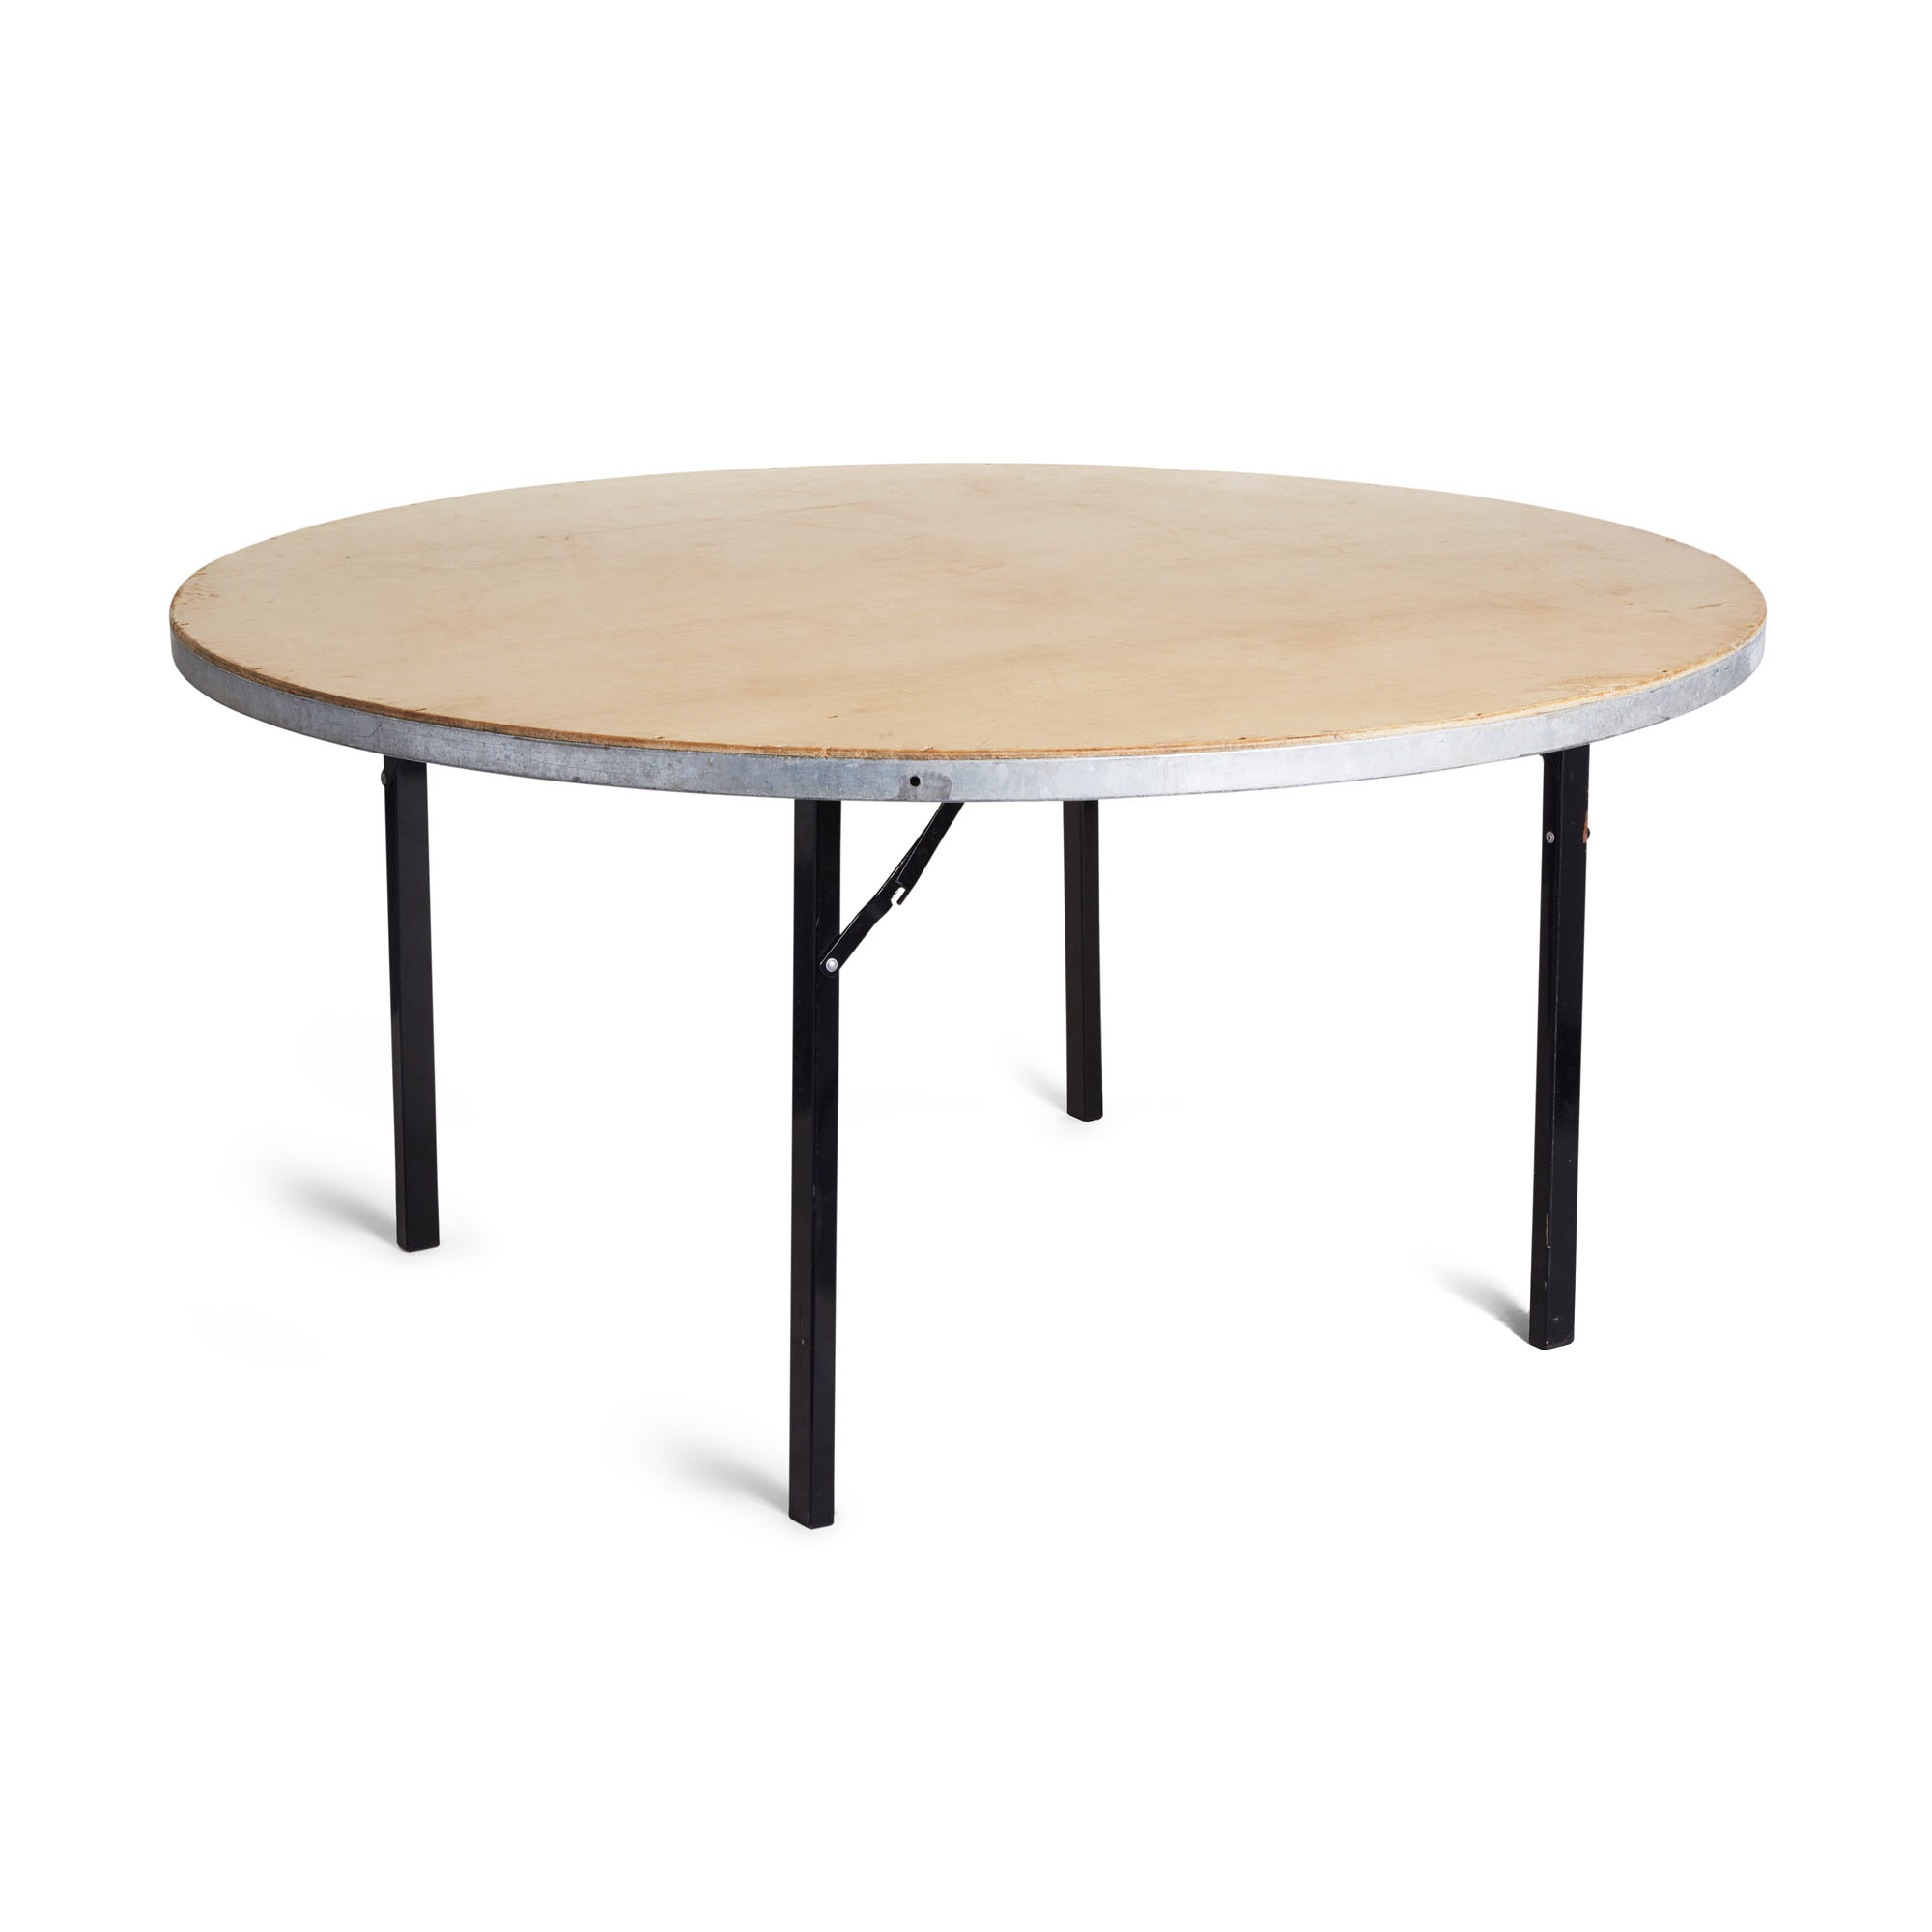 Banquet Large Round Table Seats 10, How Big Are Round Tables That Seat 8m